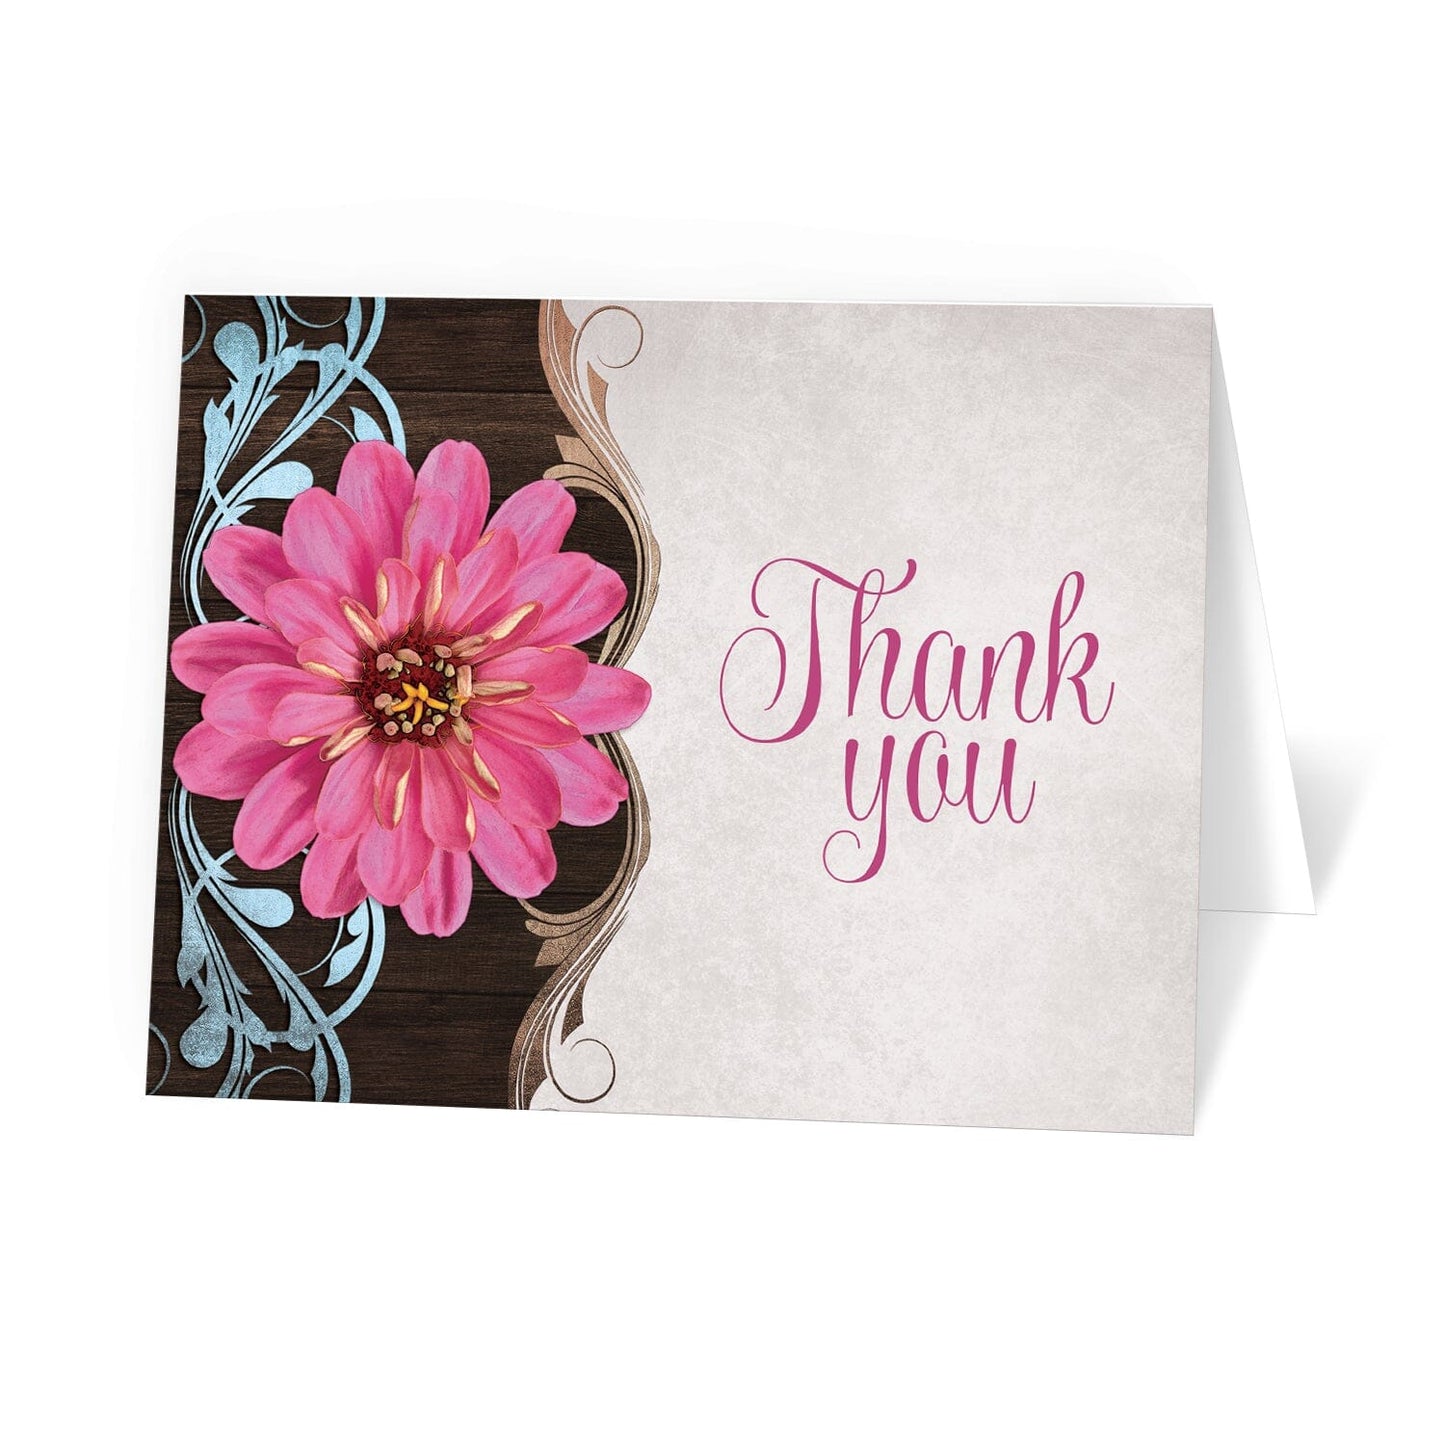 Rustic Country Pink Zinnia Thank You Cards at Artistically Invited.